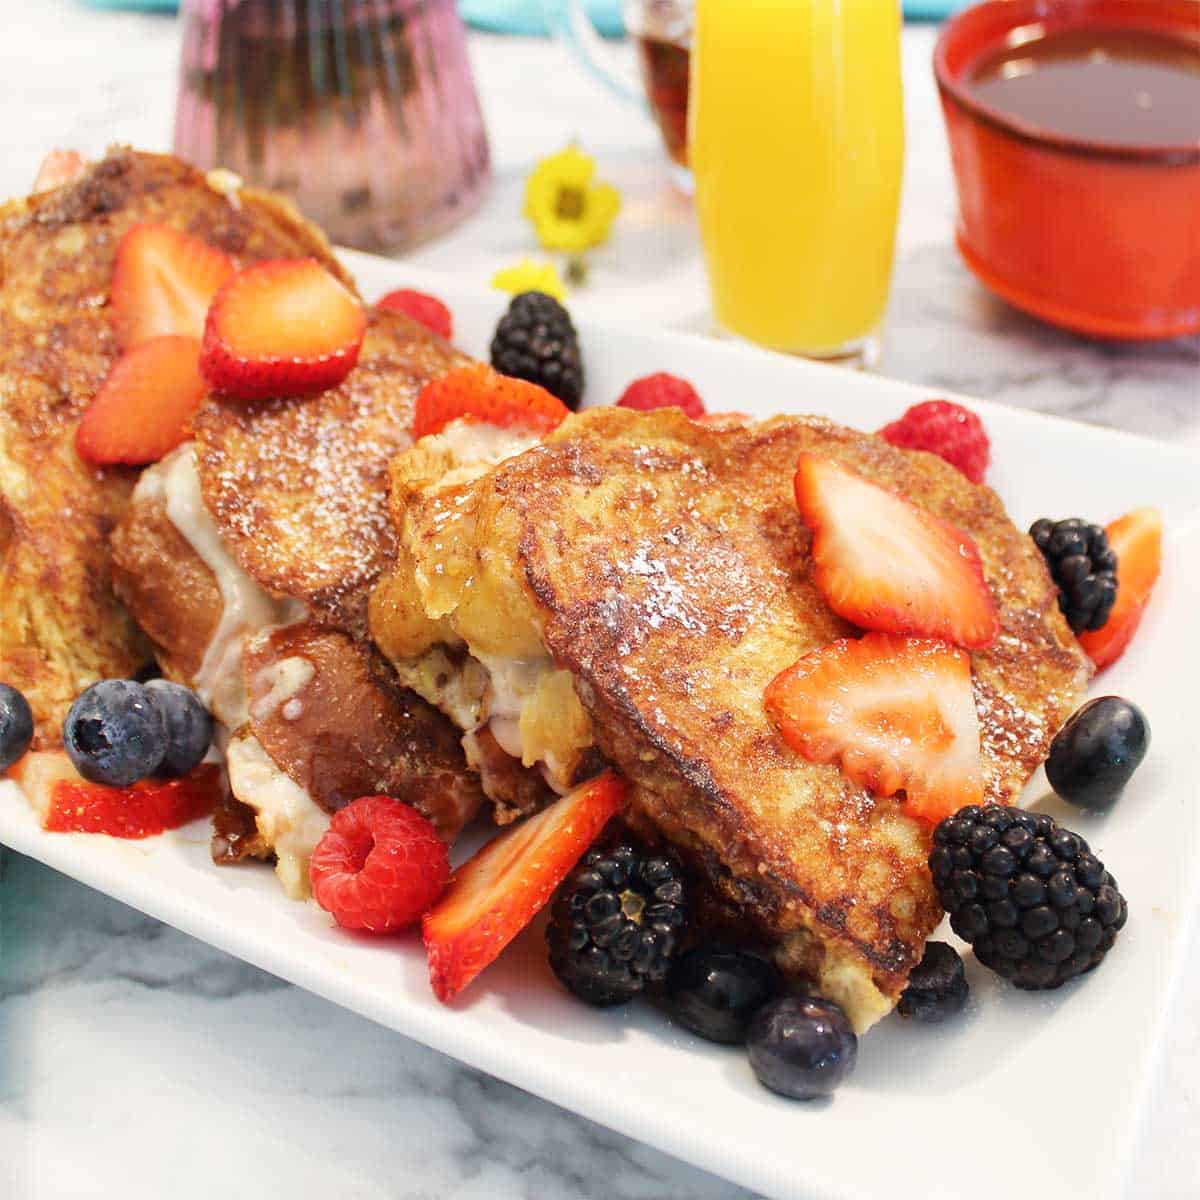 Strawberry French Toast on platter with fruit.